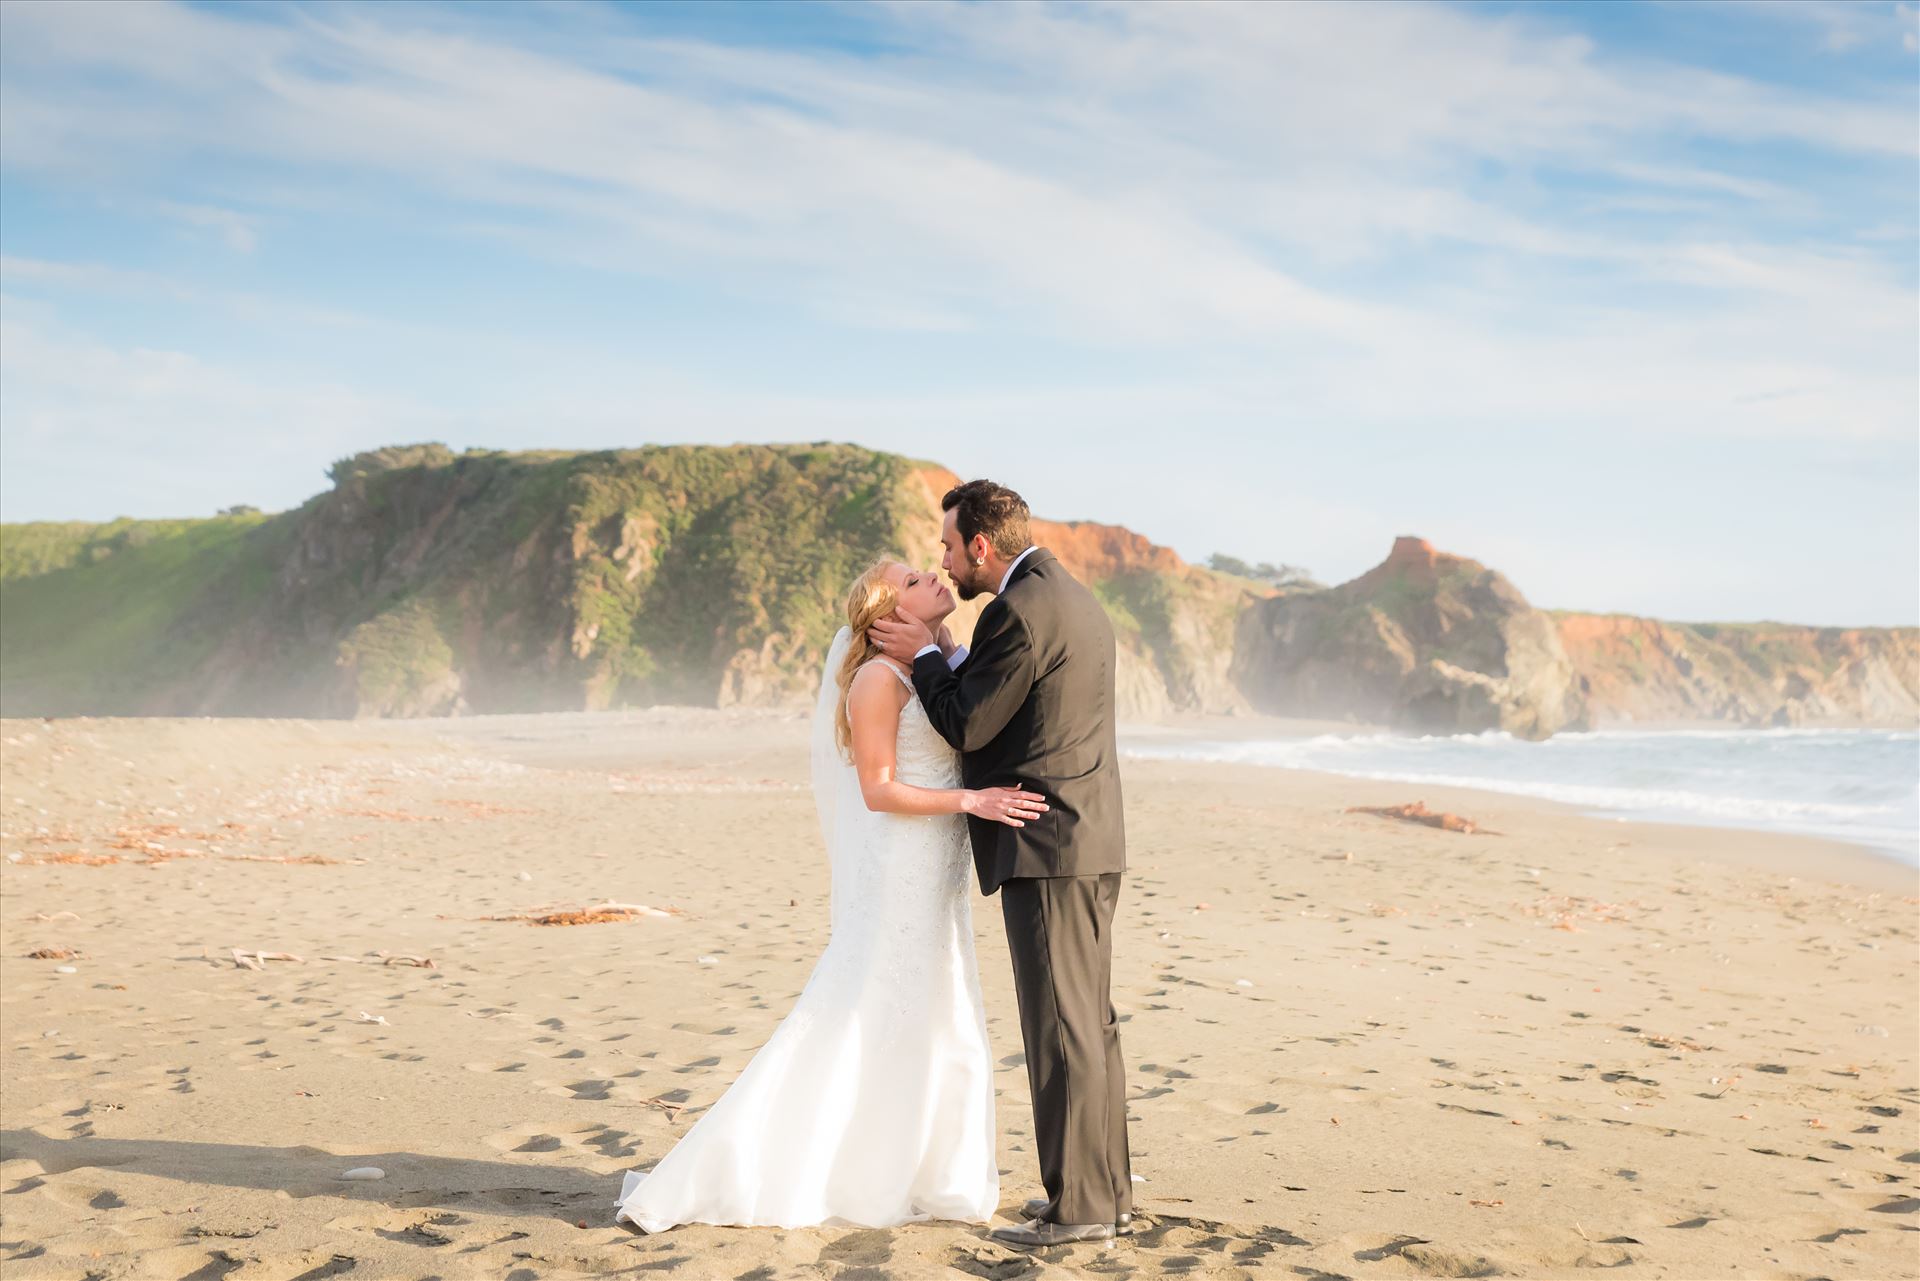 Adele and Jason 23 - Ragged Point Inn Wedding Elopement photography by Mirror's Edge Photography in San Simeon Cambria California. Bride and Groom at sunset on the beach. Big Sur Wedding Photography by Sarah Williams